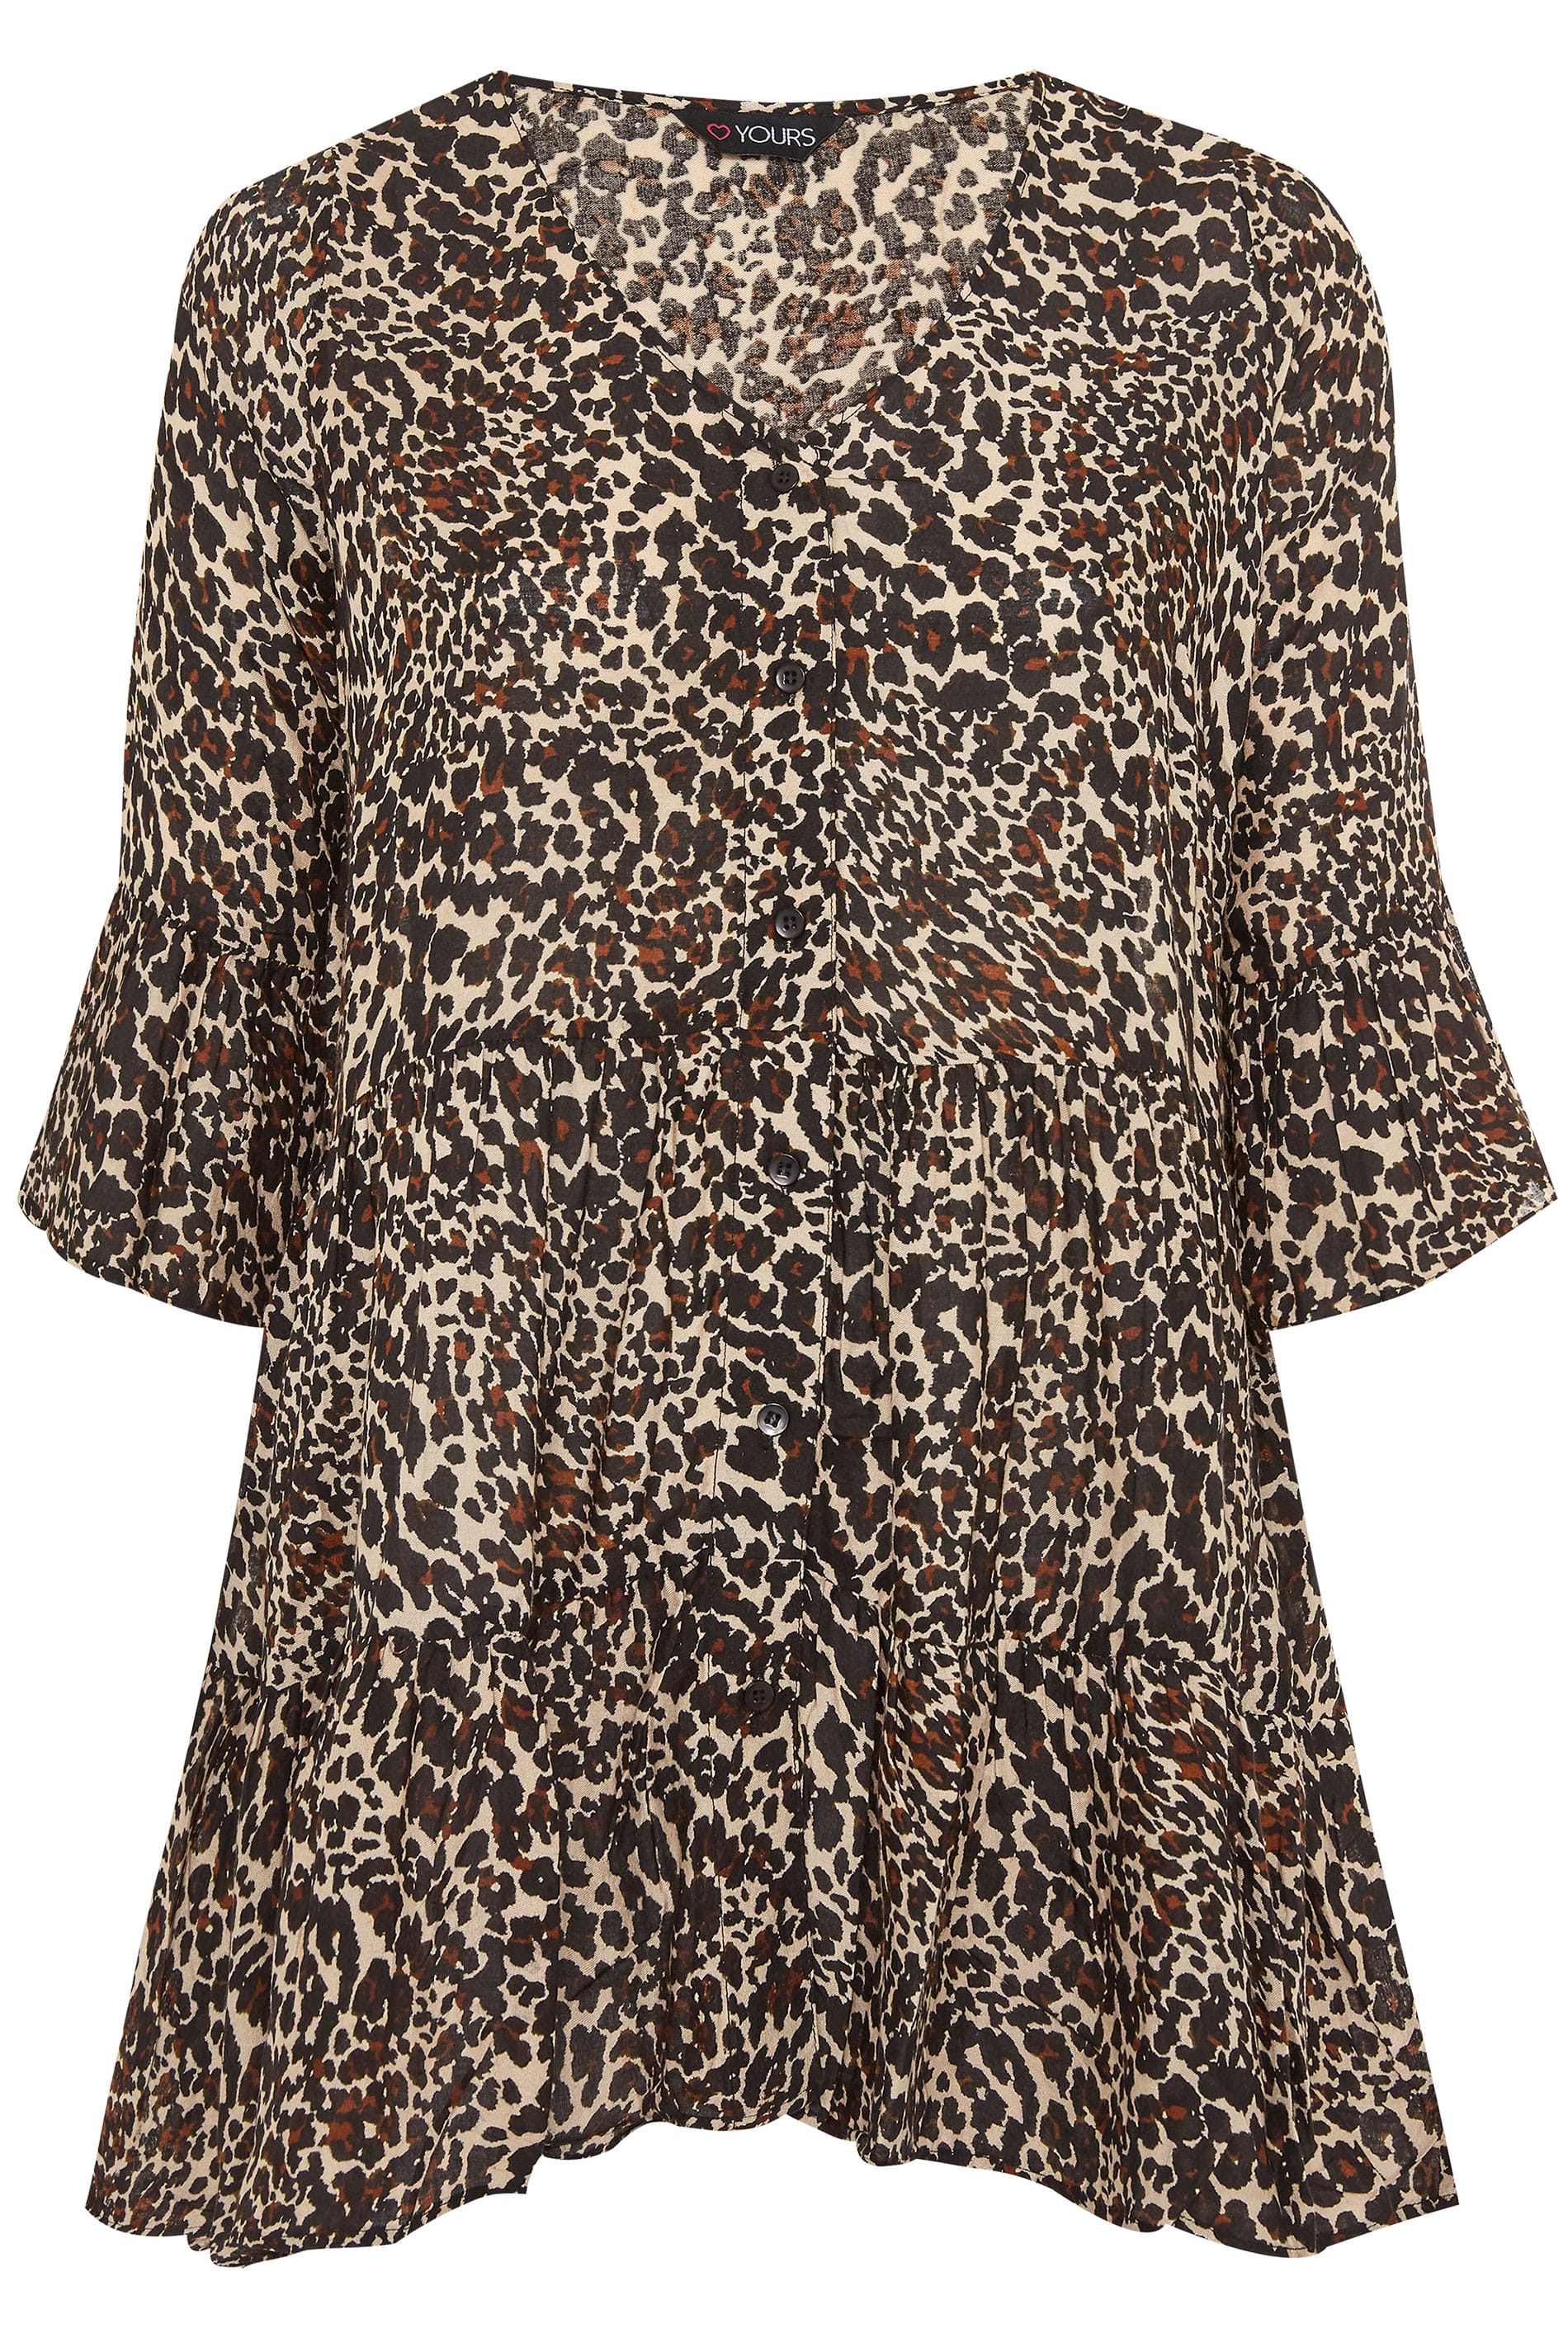 Brown Leopard Print Smock Blouse | Sizes 16-36 | Yours Clothing